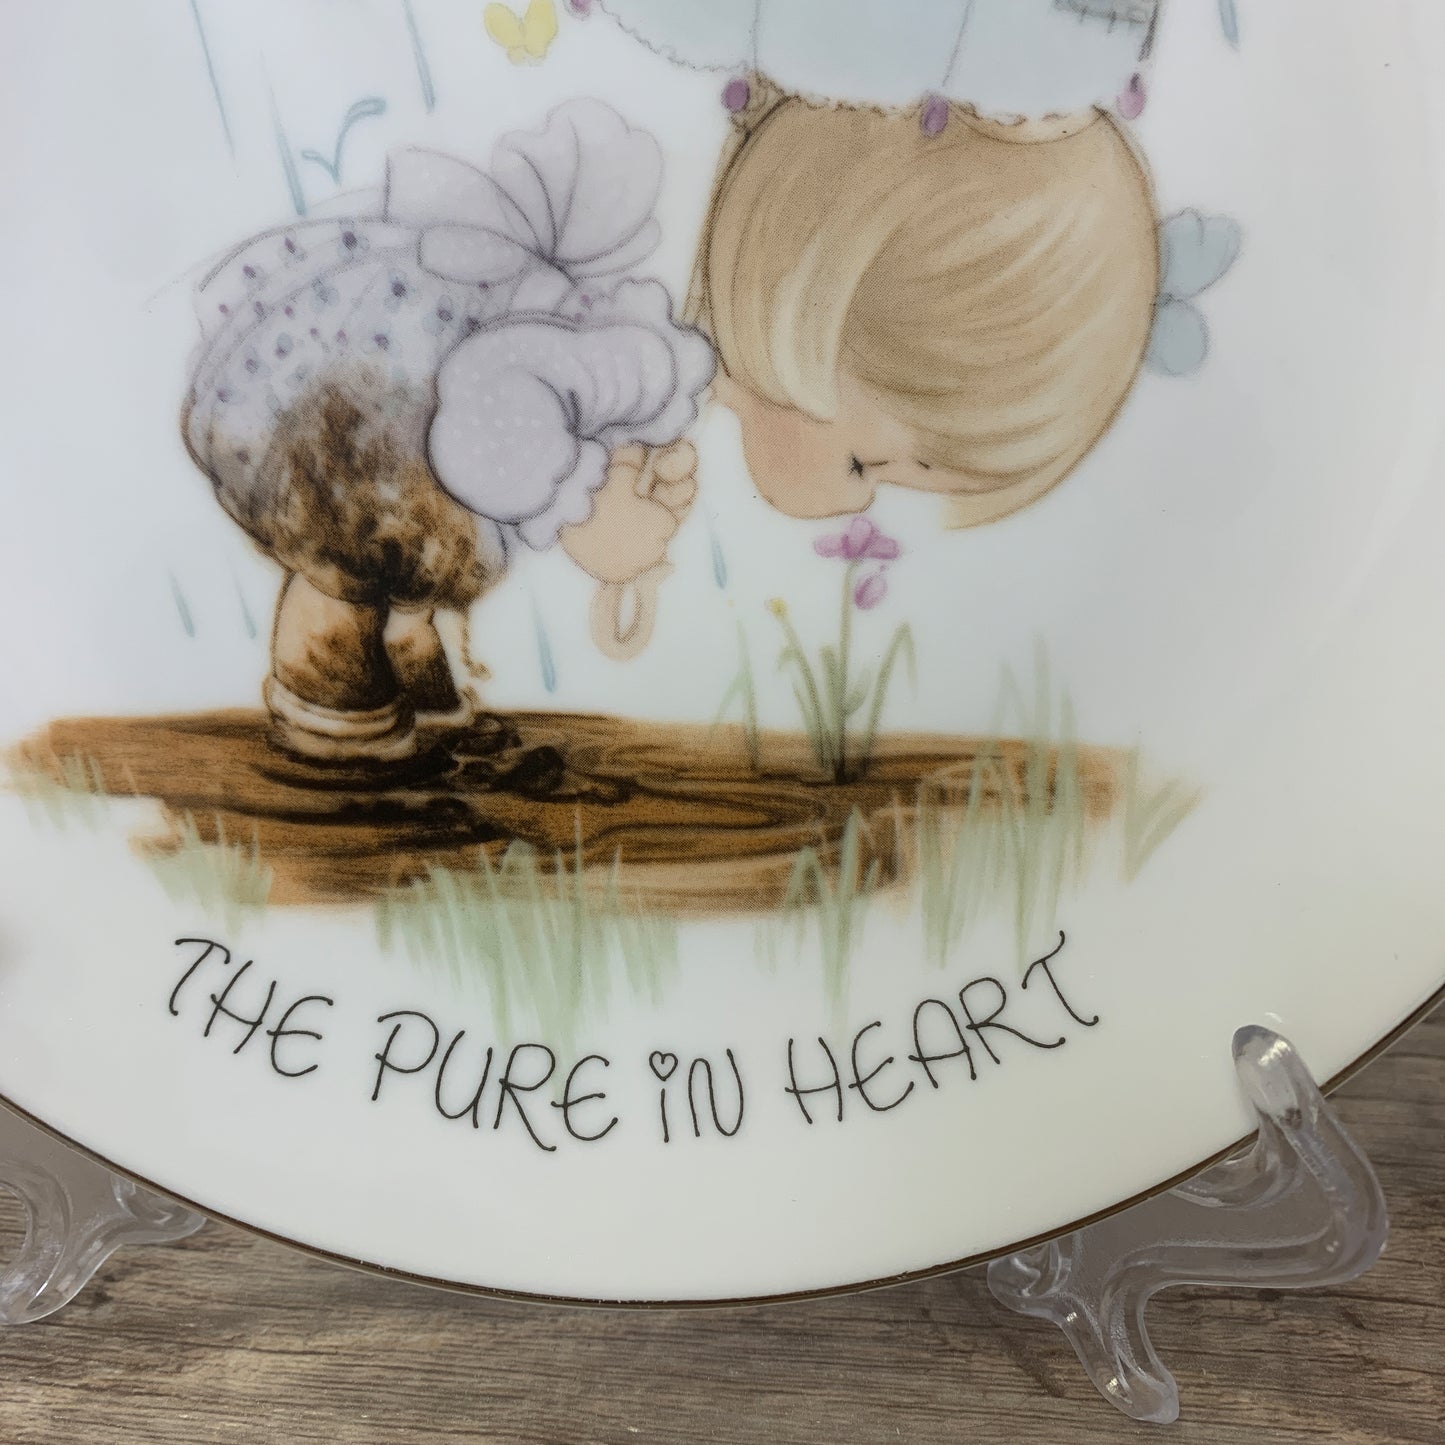 Precious Moments 1980s Enesco Blessed are the Pure in Heart Collector Plate